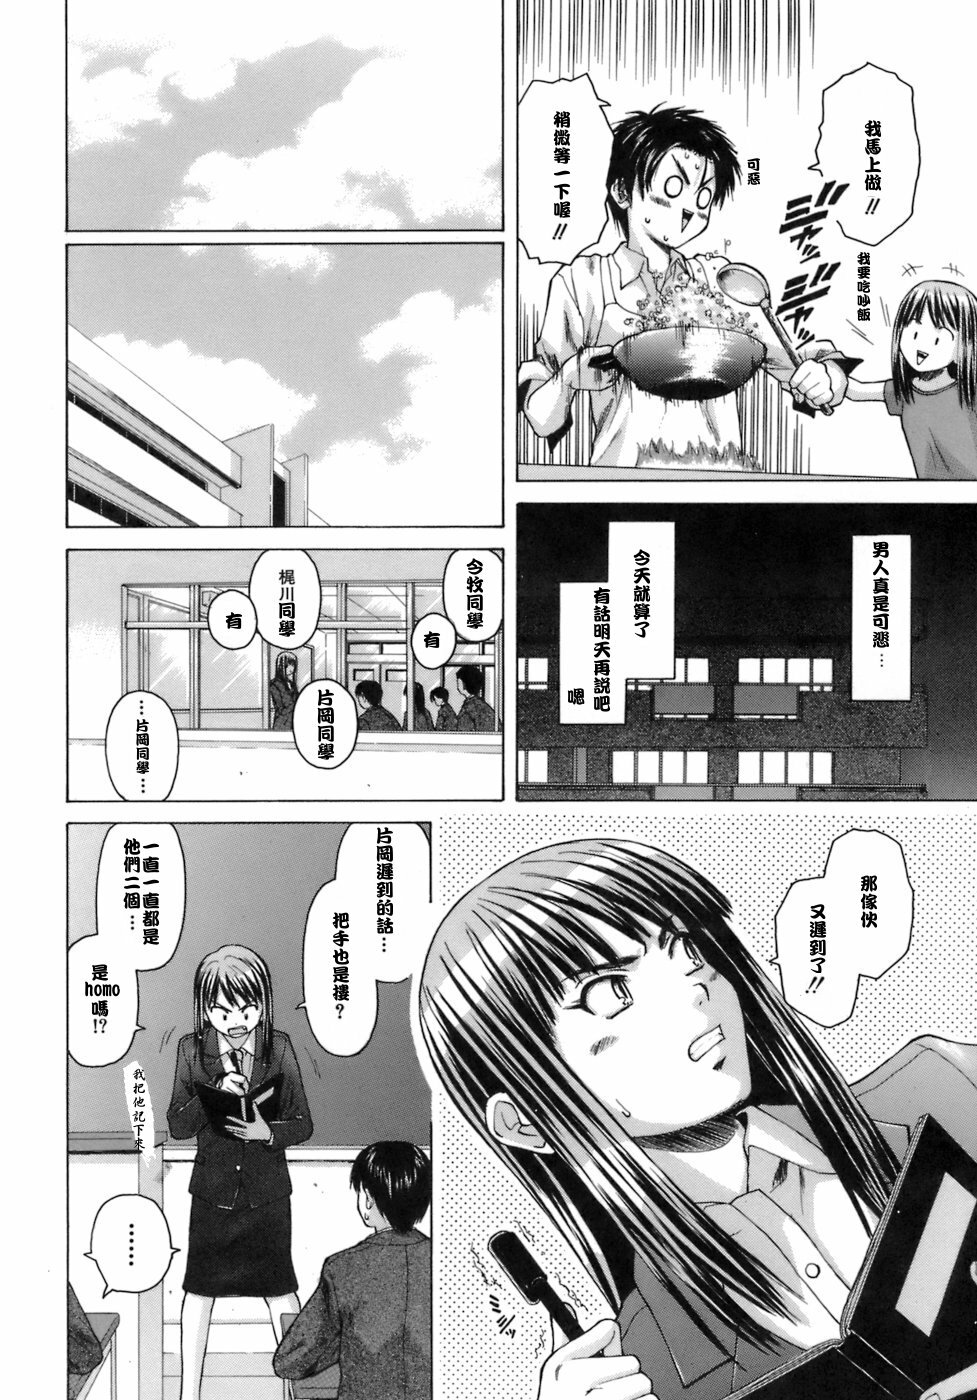 [Fuuga] Kyoushi to Seito to - Teacher and Student [Chinese] [悠月工房] page 49 full